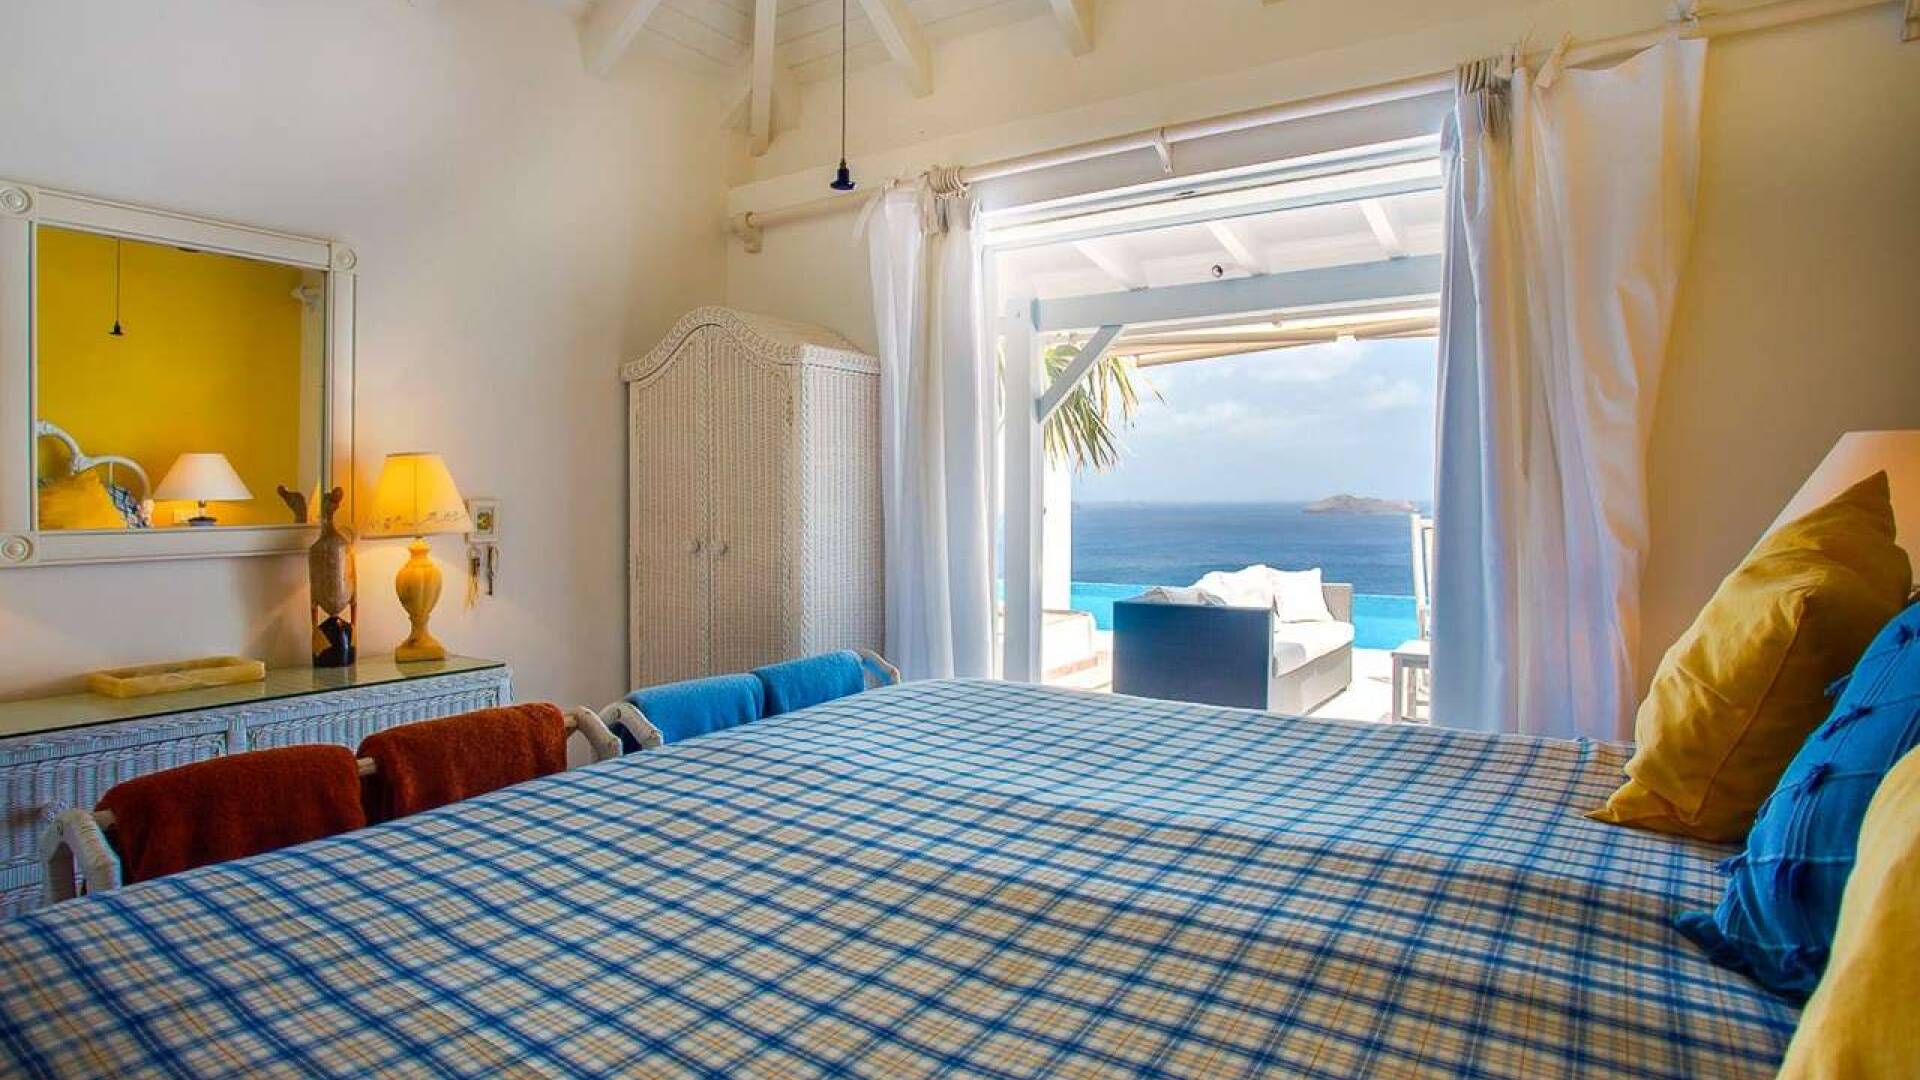 Bedroom at WV FRE, Pointe Milou, St. Barthelemy